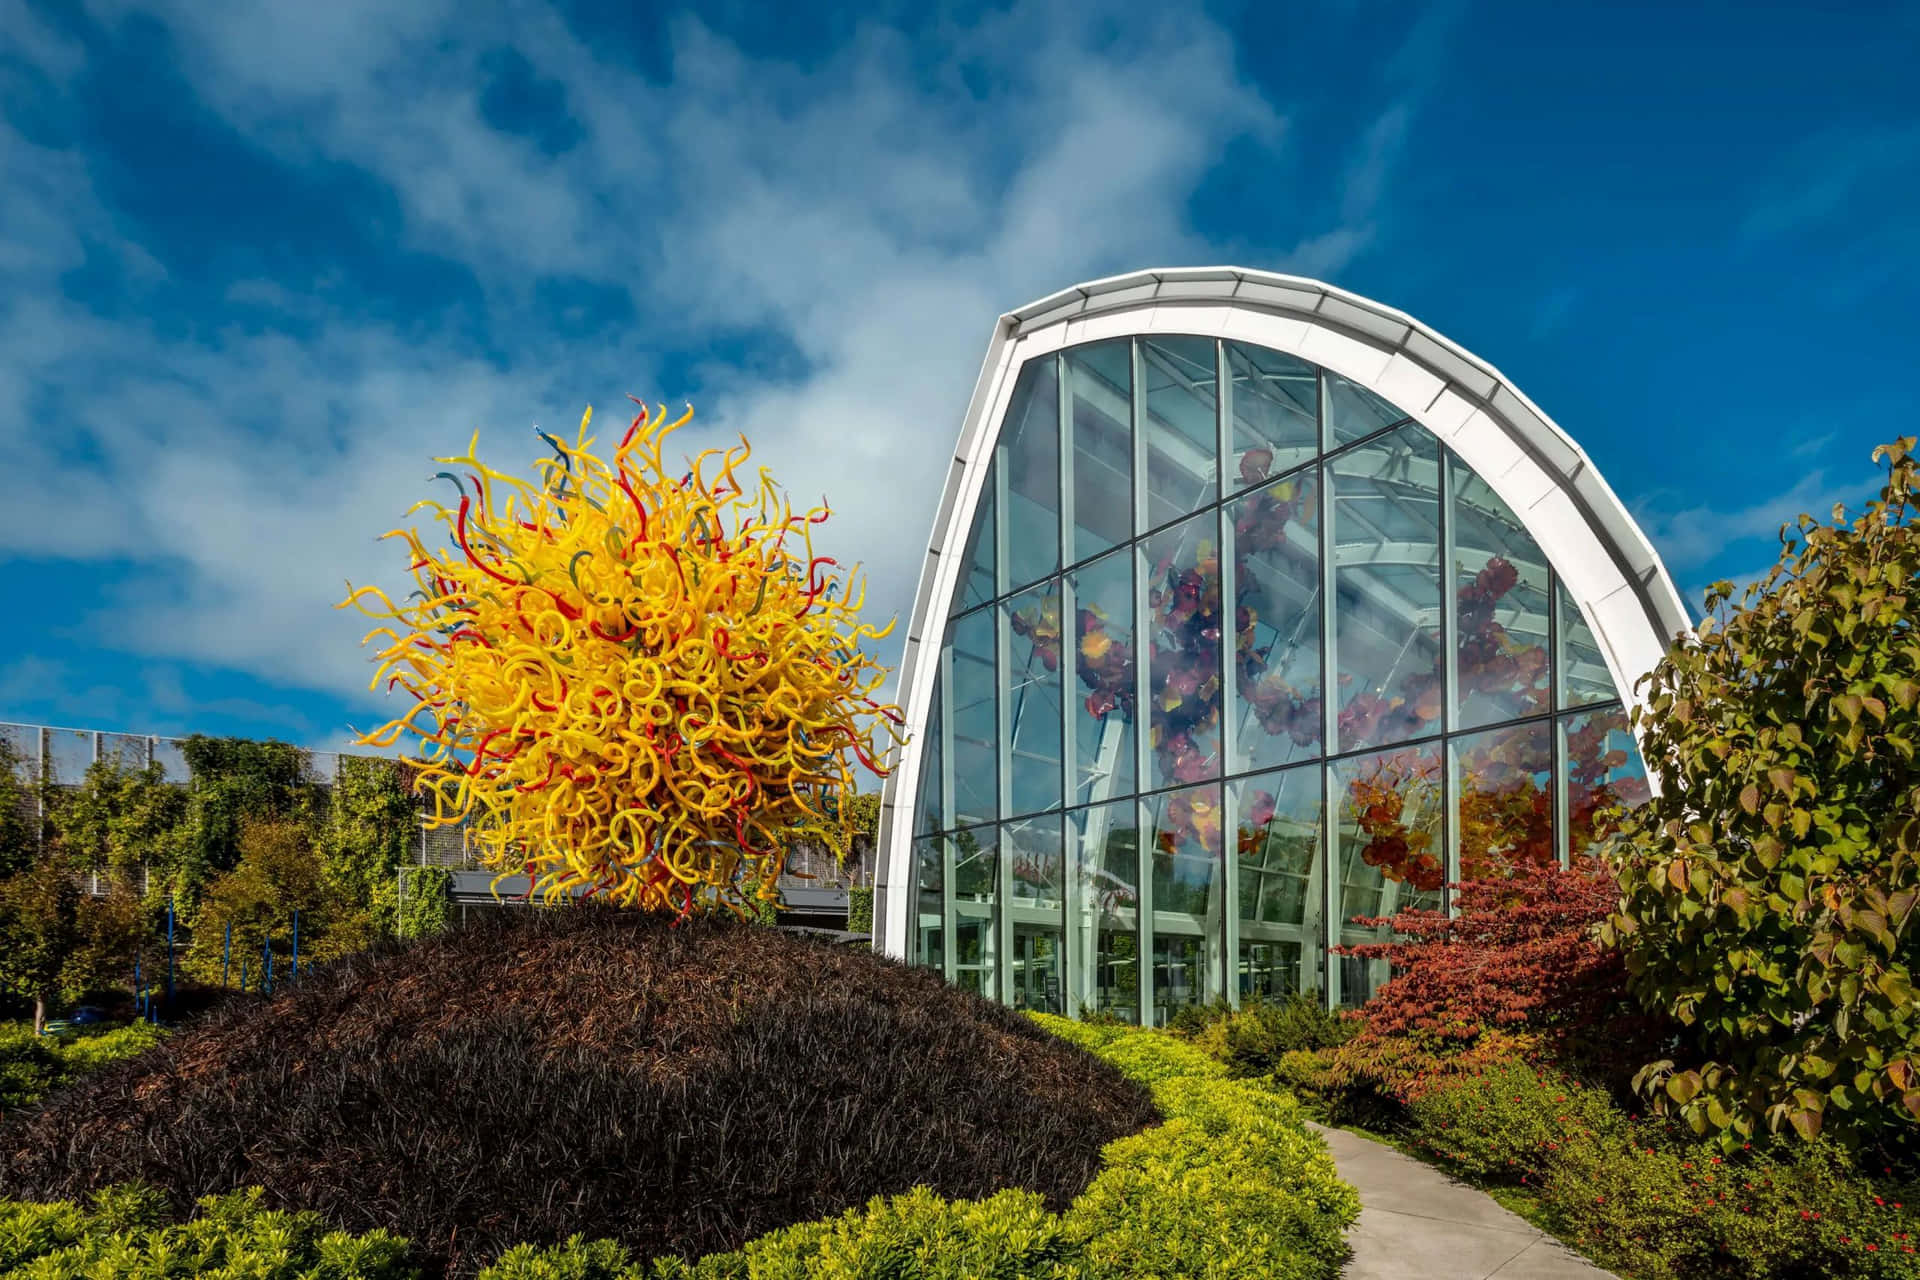 Chihuly Gardenand Glass Exteriorwith Sculpture Wallpaper